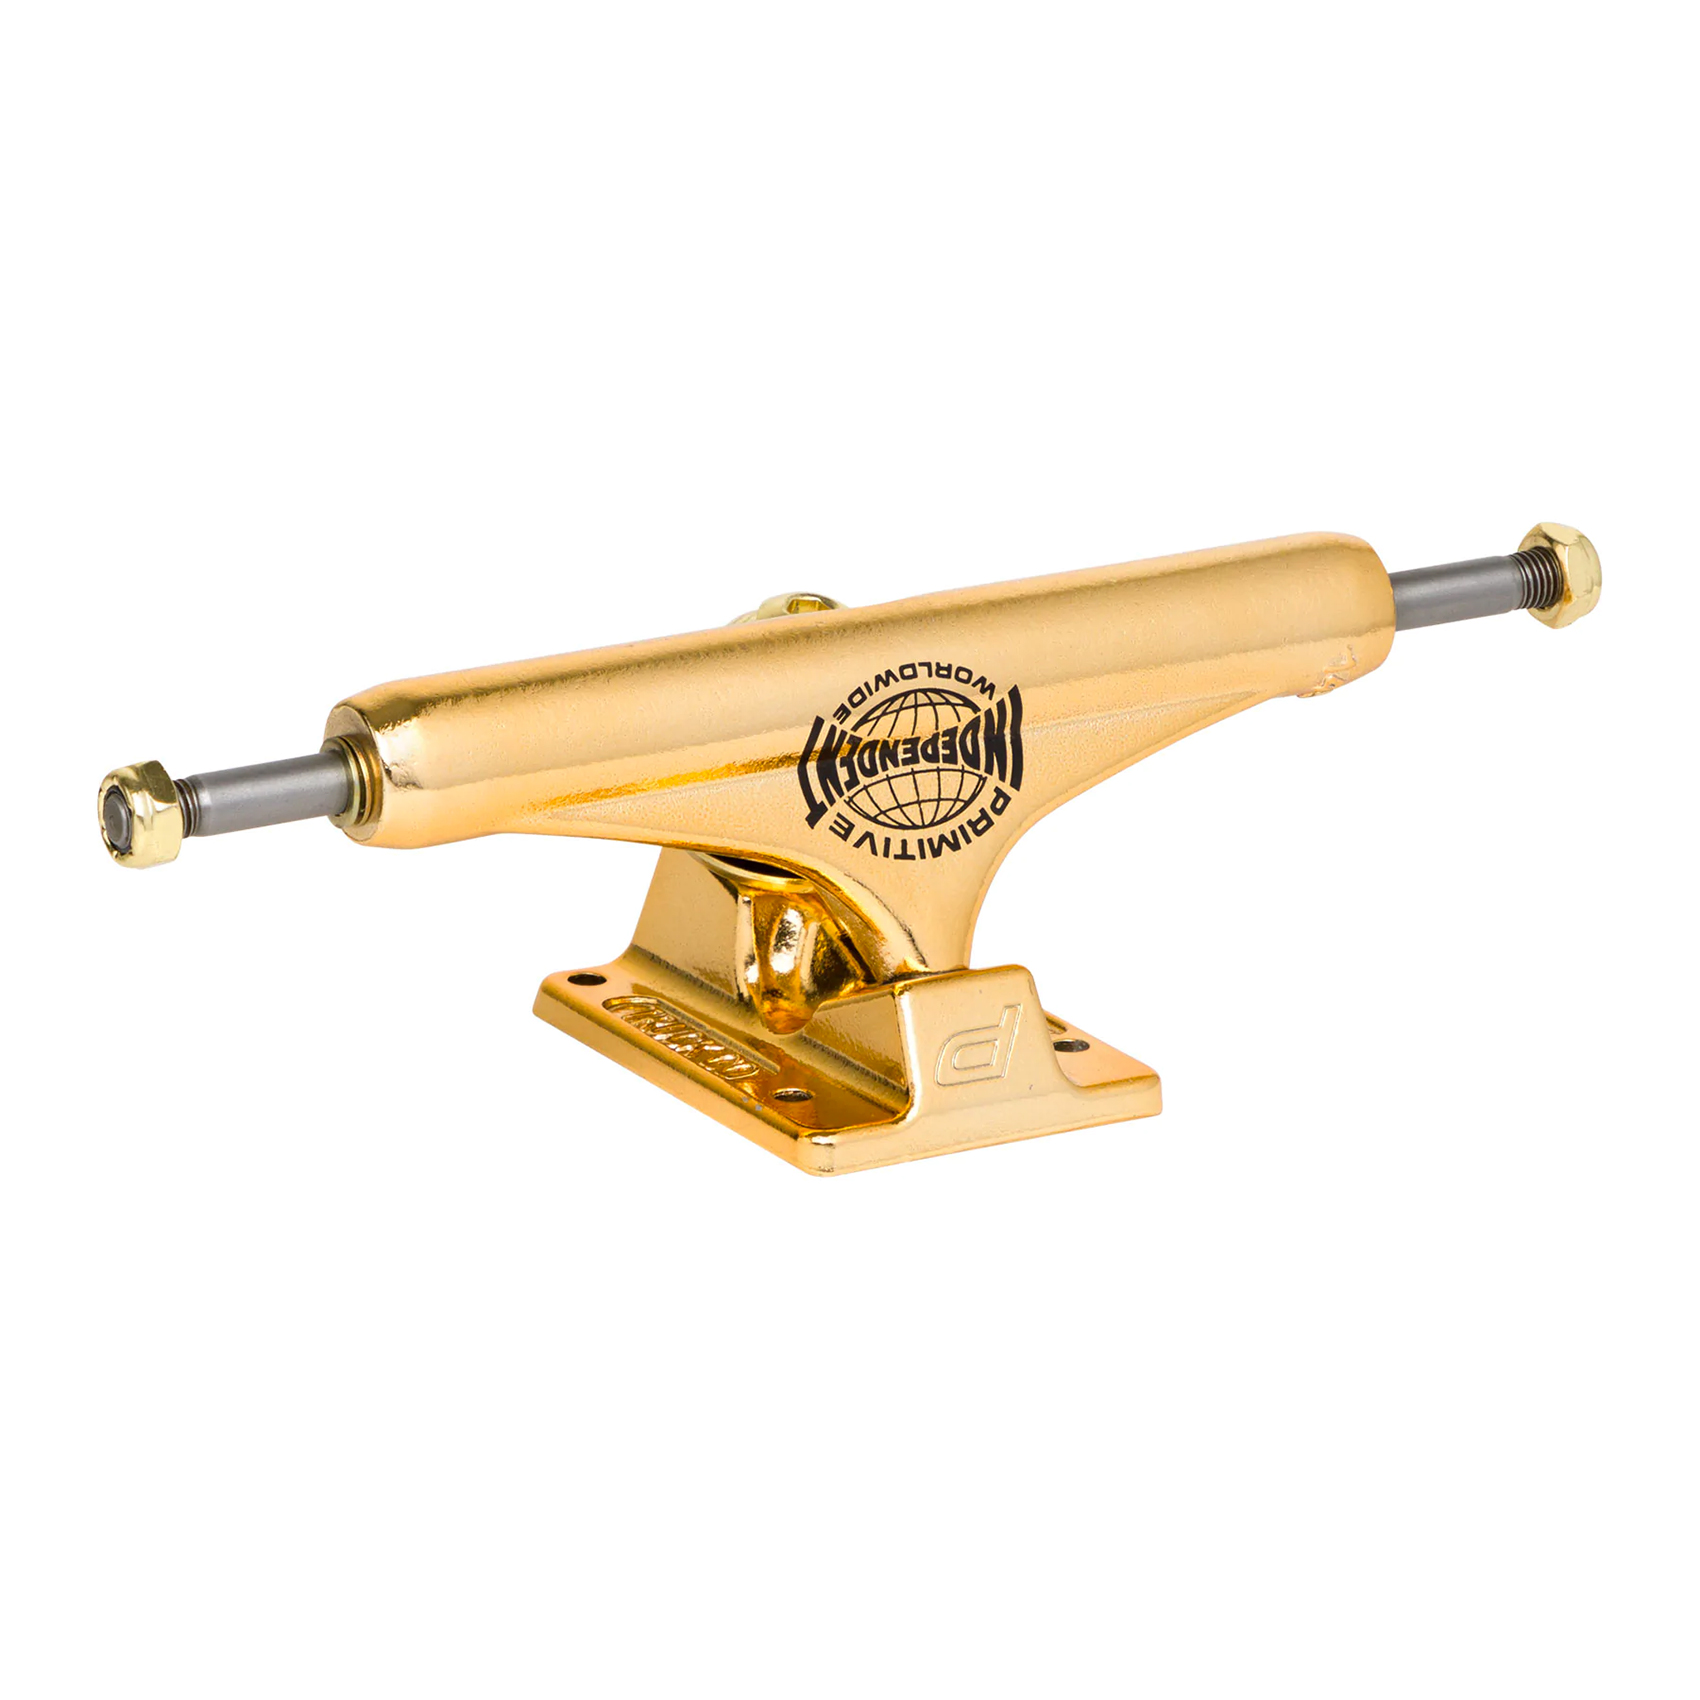 Independent x Primitive Skateboardachse Stage 11 Gold Mid 144mm